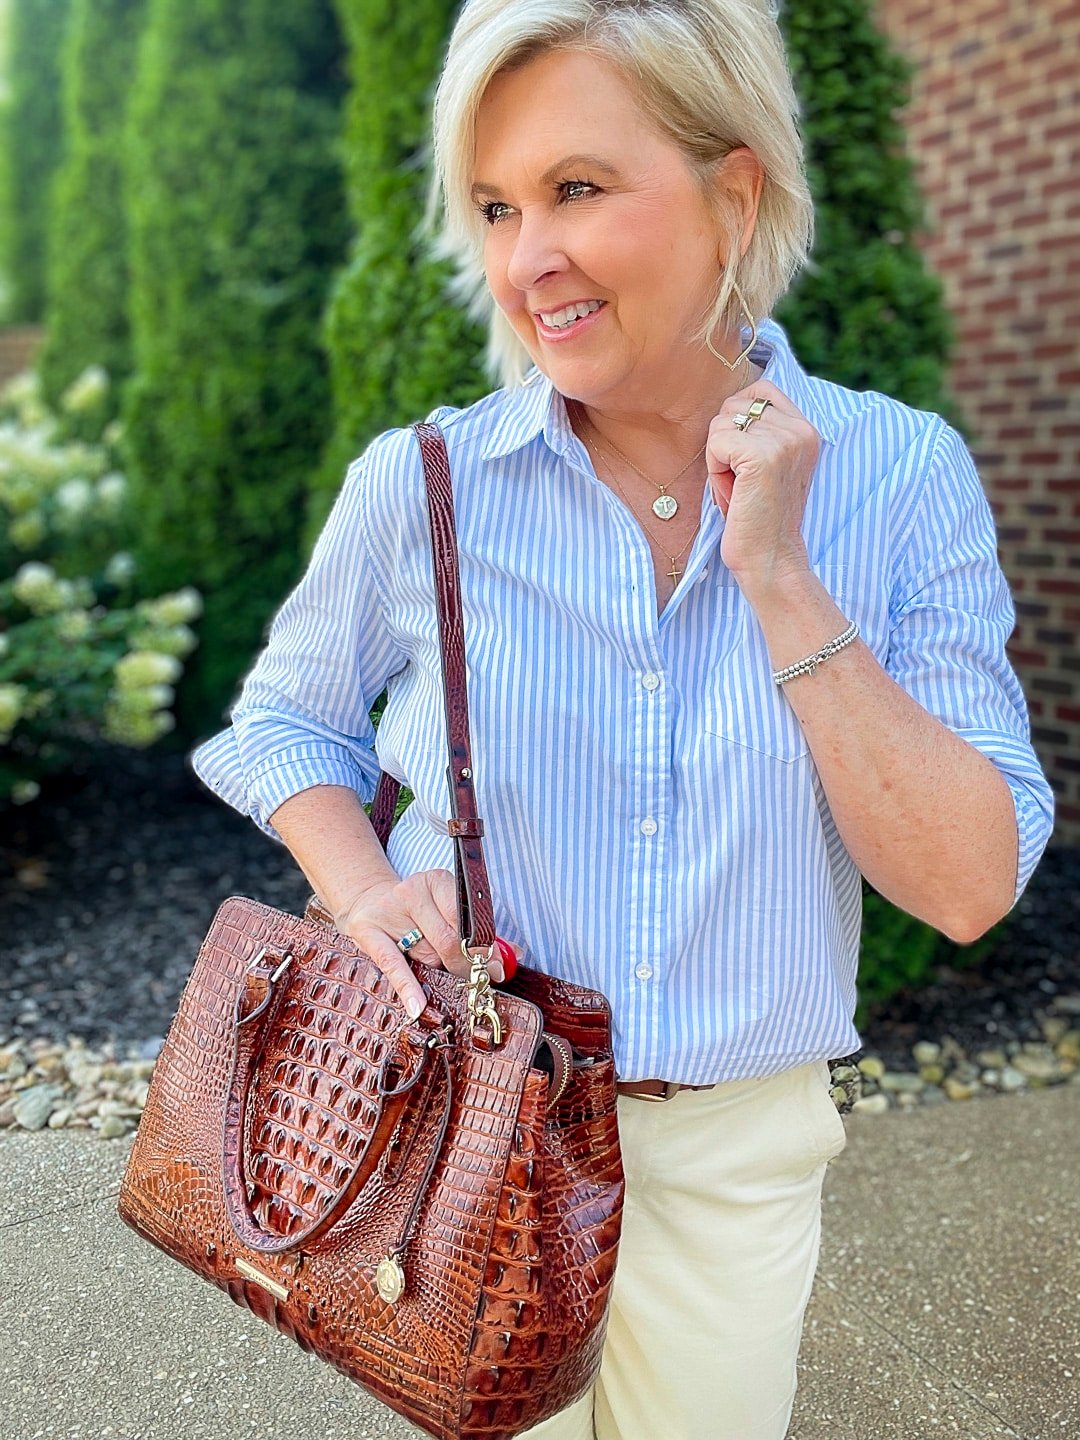 Over 40 Fashion Blogger, Tania Stephens is showing how to style Chinos and a striped shirt for summer16